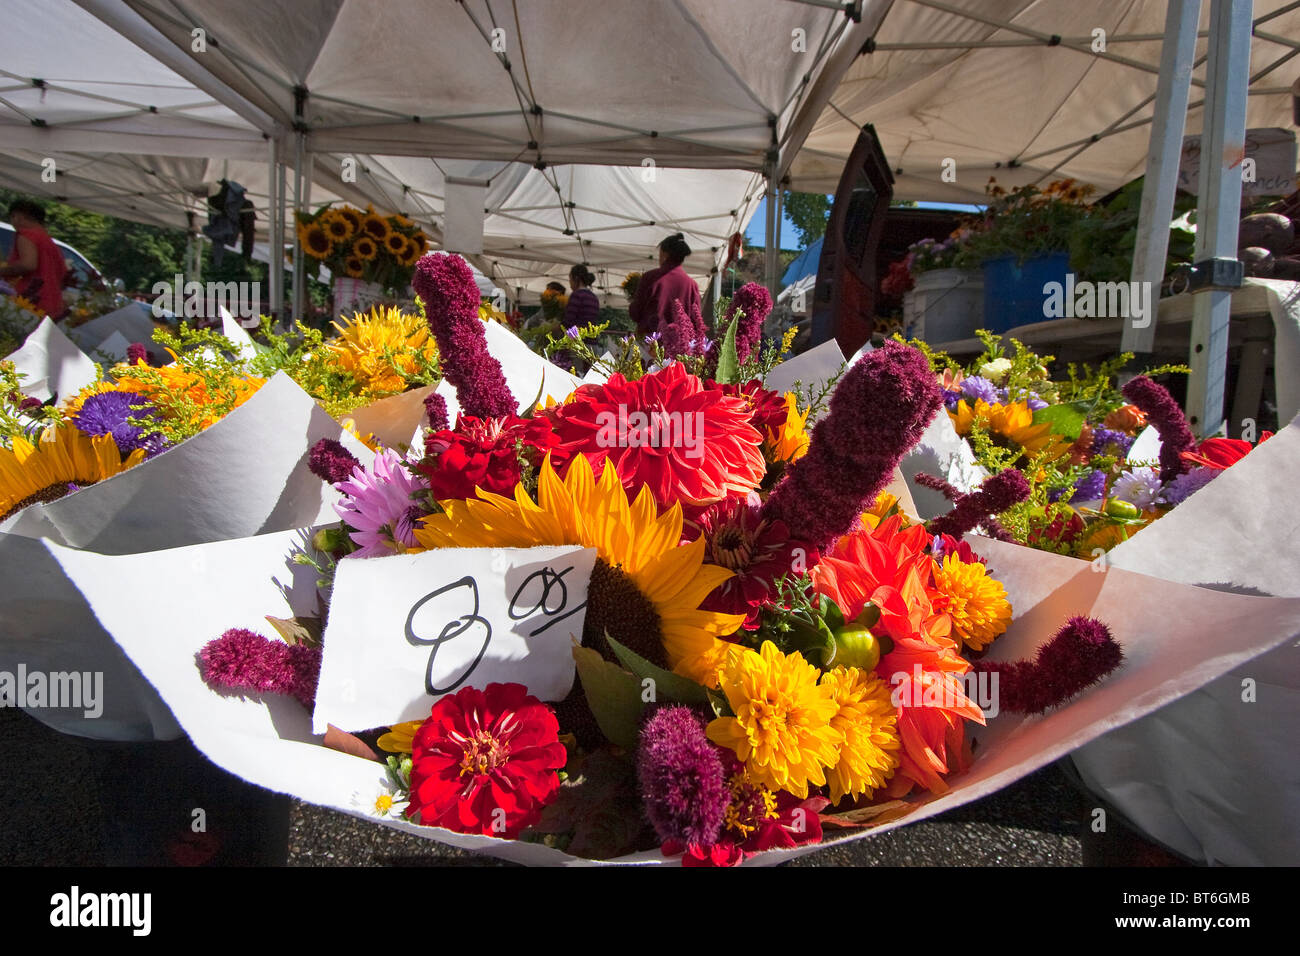 Colorful bouquets of flowers for sale at farmer's market, Edmonds, Washington, USA Stock Photo